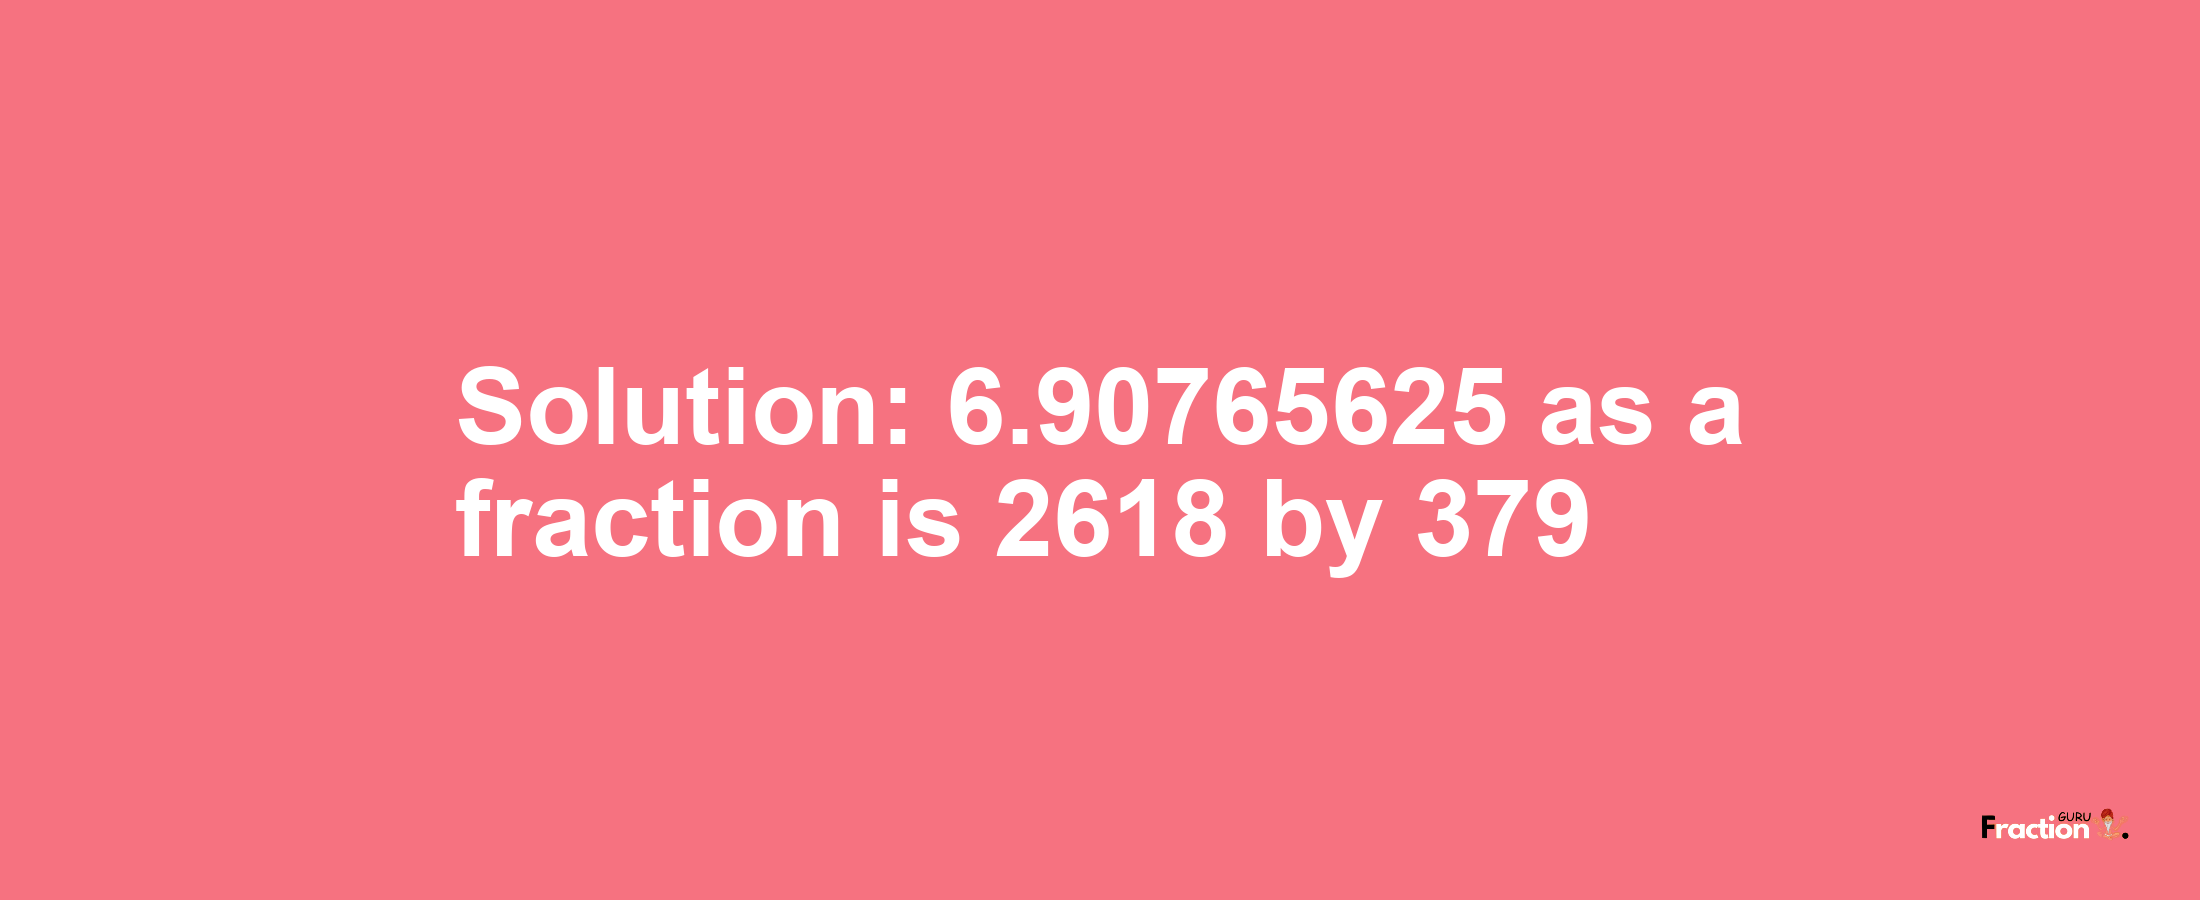 Solution:6.90765625 as a fraction is 2618/379